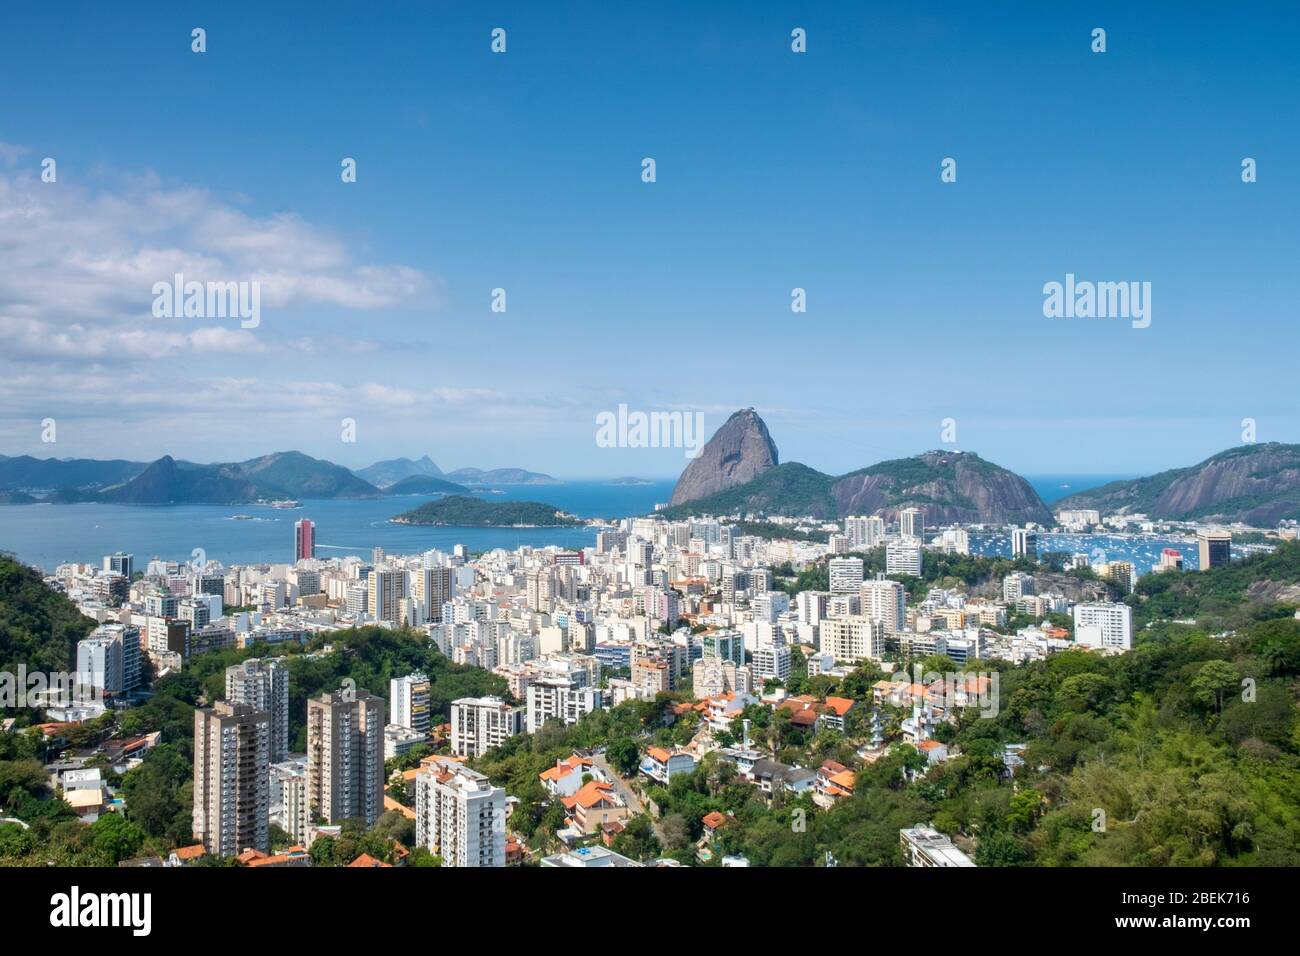 South America, Brazil, Rio de Janeiro. View of the Botafogo residential neighbourhood with Sugar Loaf mountain and Guanabara Bay behind Stock Photo